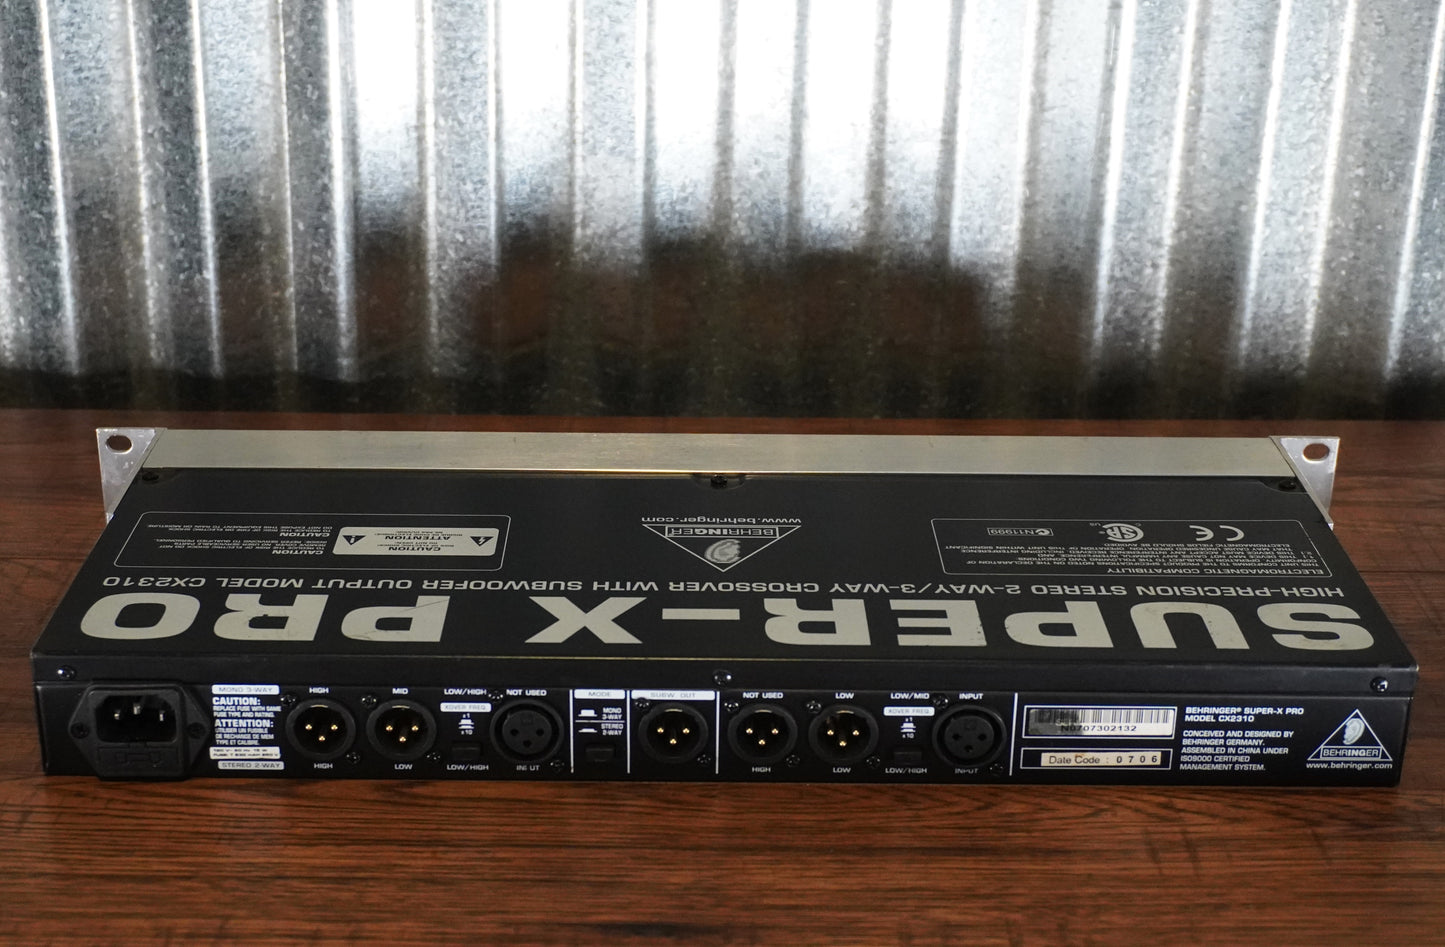 Behringer Super-X Pro CX2310 Stereo 2-Way/Mono 3-Way Crossover Rackmount Used